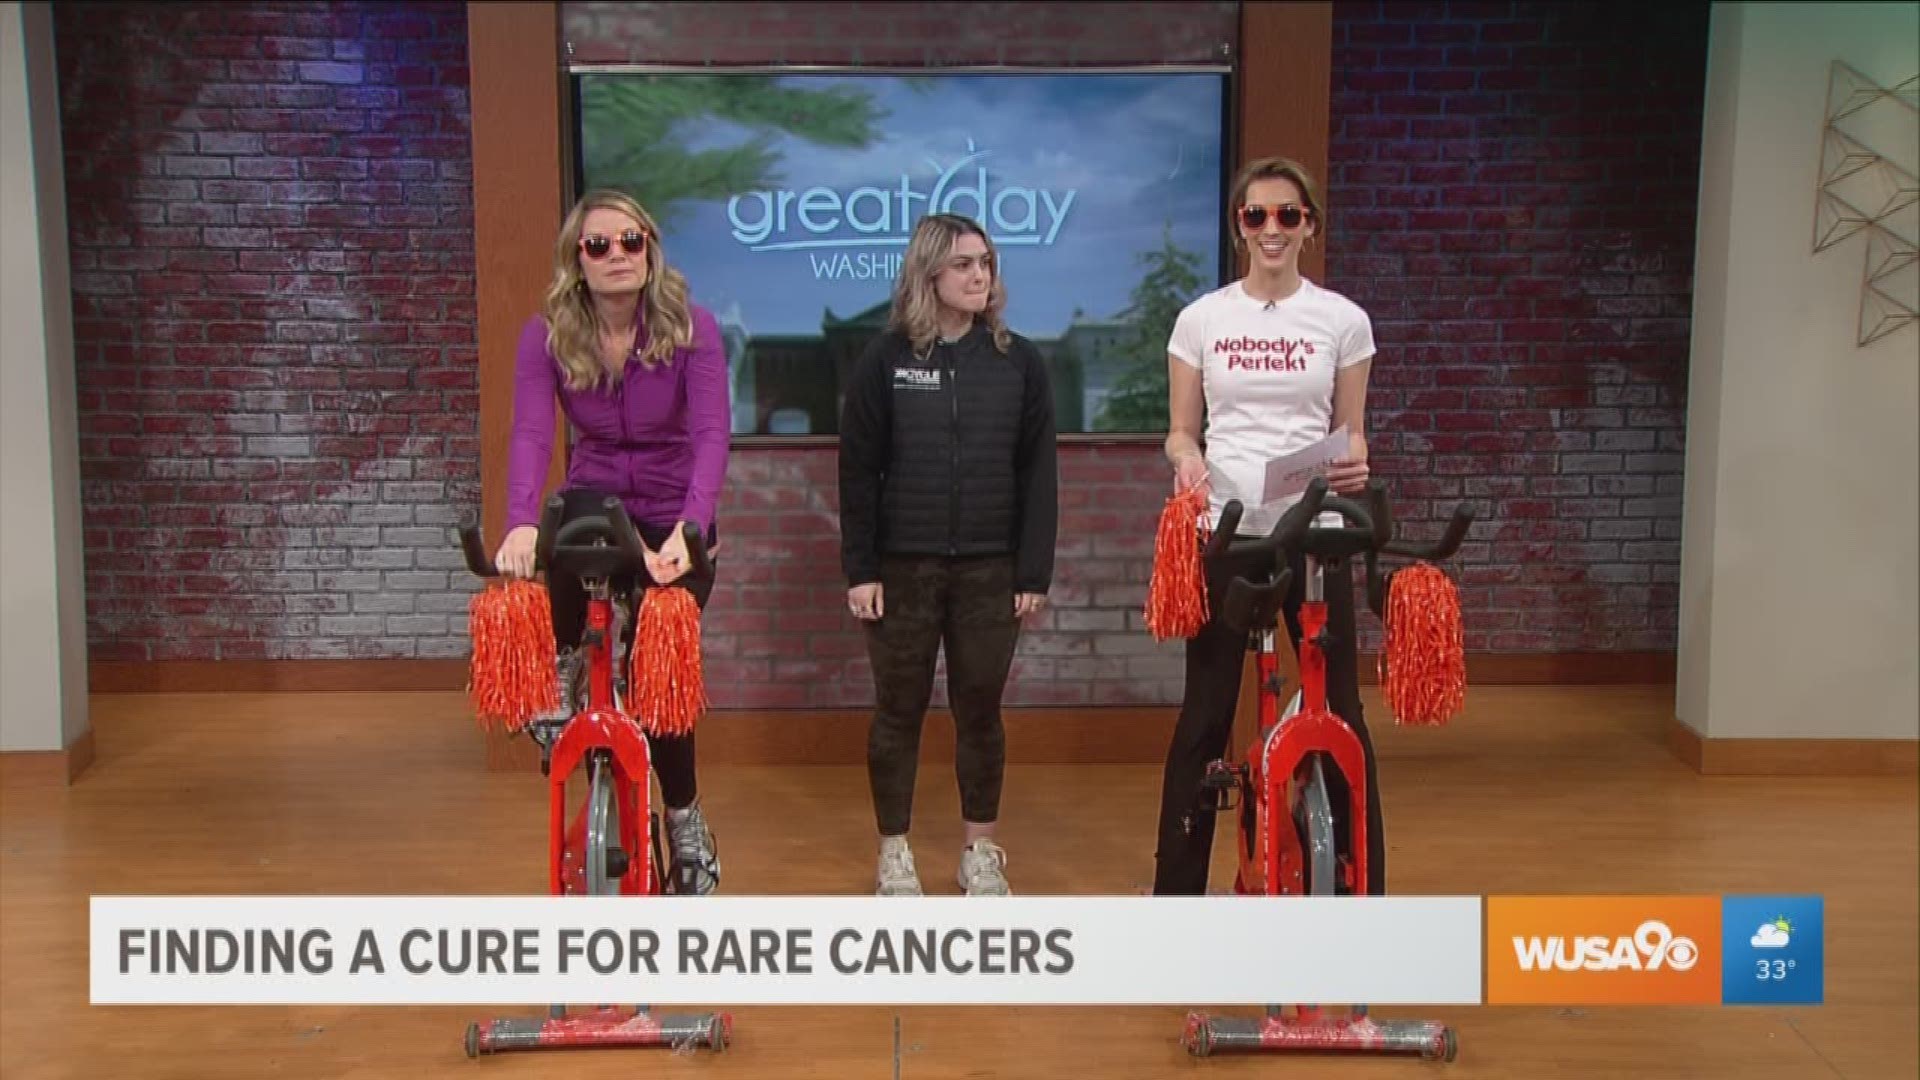 Casey Borella tells us about Cycle for Survival and shares why she spins each year in honor of her dad who passed away from a rare form of cancer.